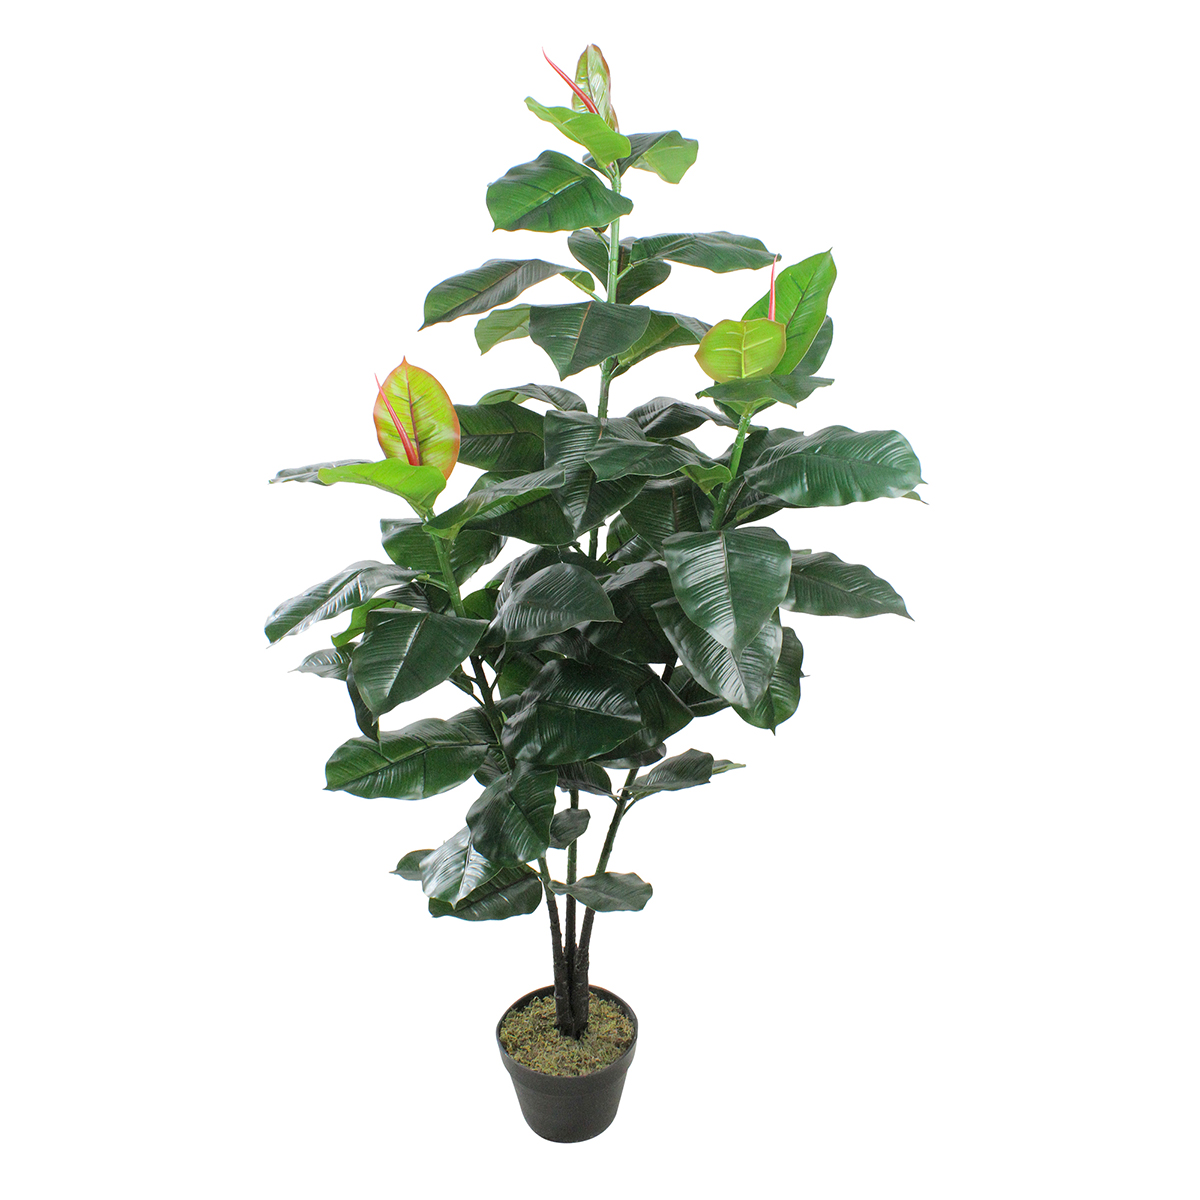 Northlight Seasonal 51in. Unlit Artificial Potted Plant